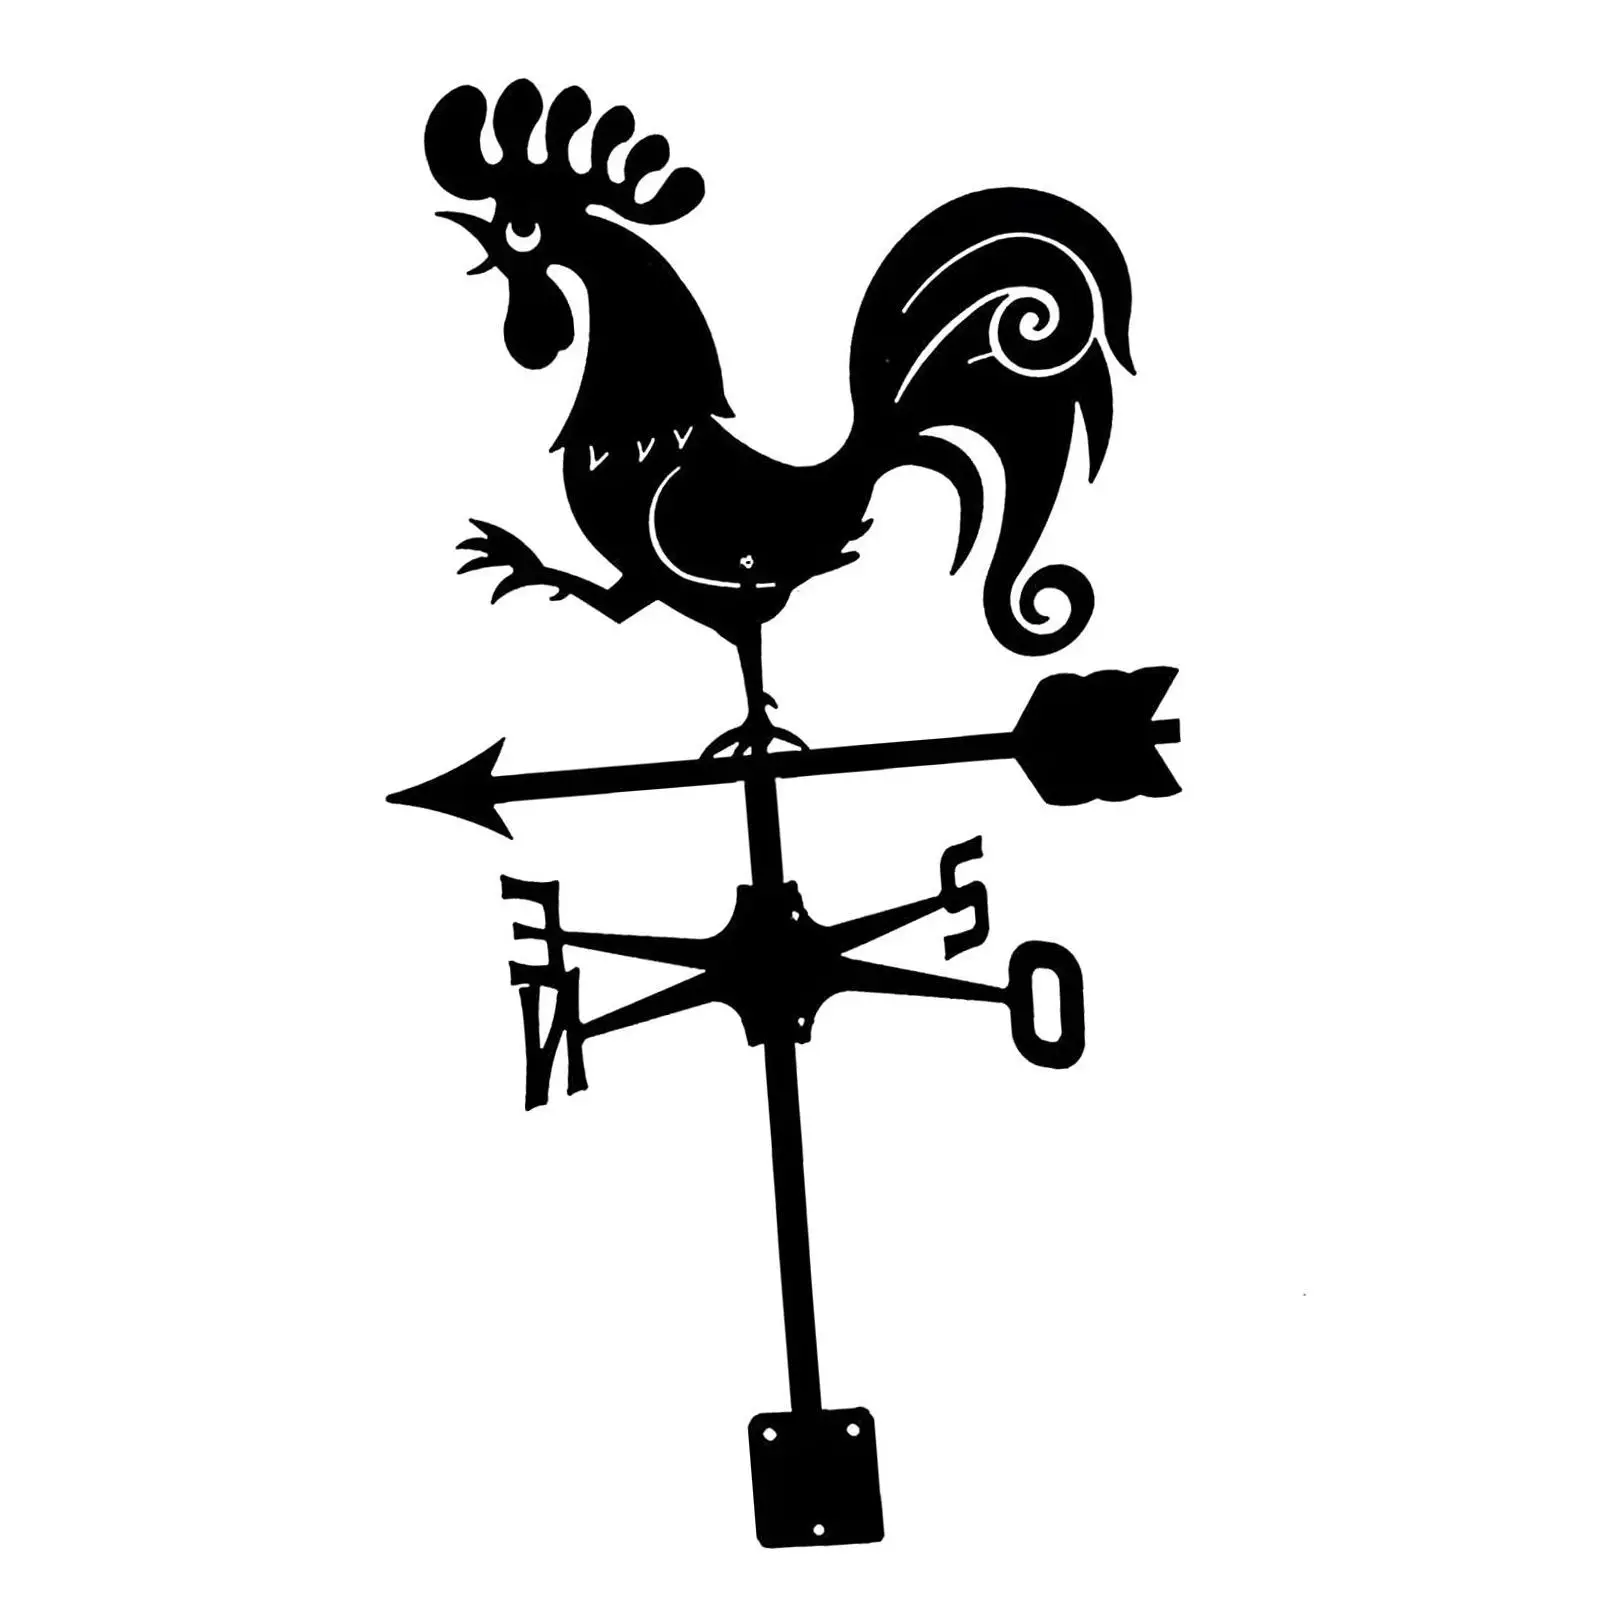 Weathervane Classic Style 53cm Tall Weather Vane Wind Direction Measuring Instrument for Yard Cupola Garage Farmhouse Cottage